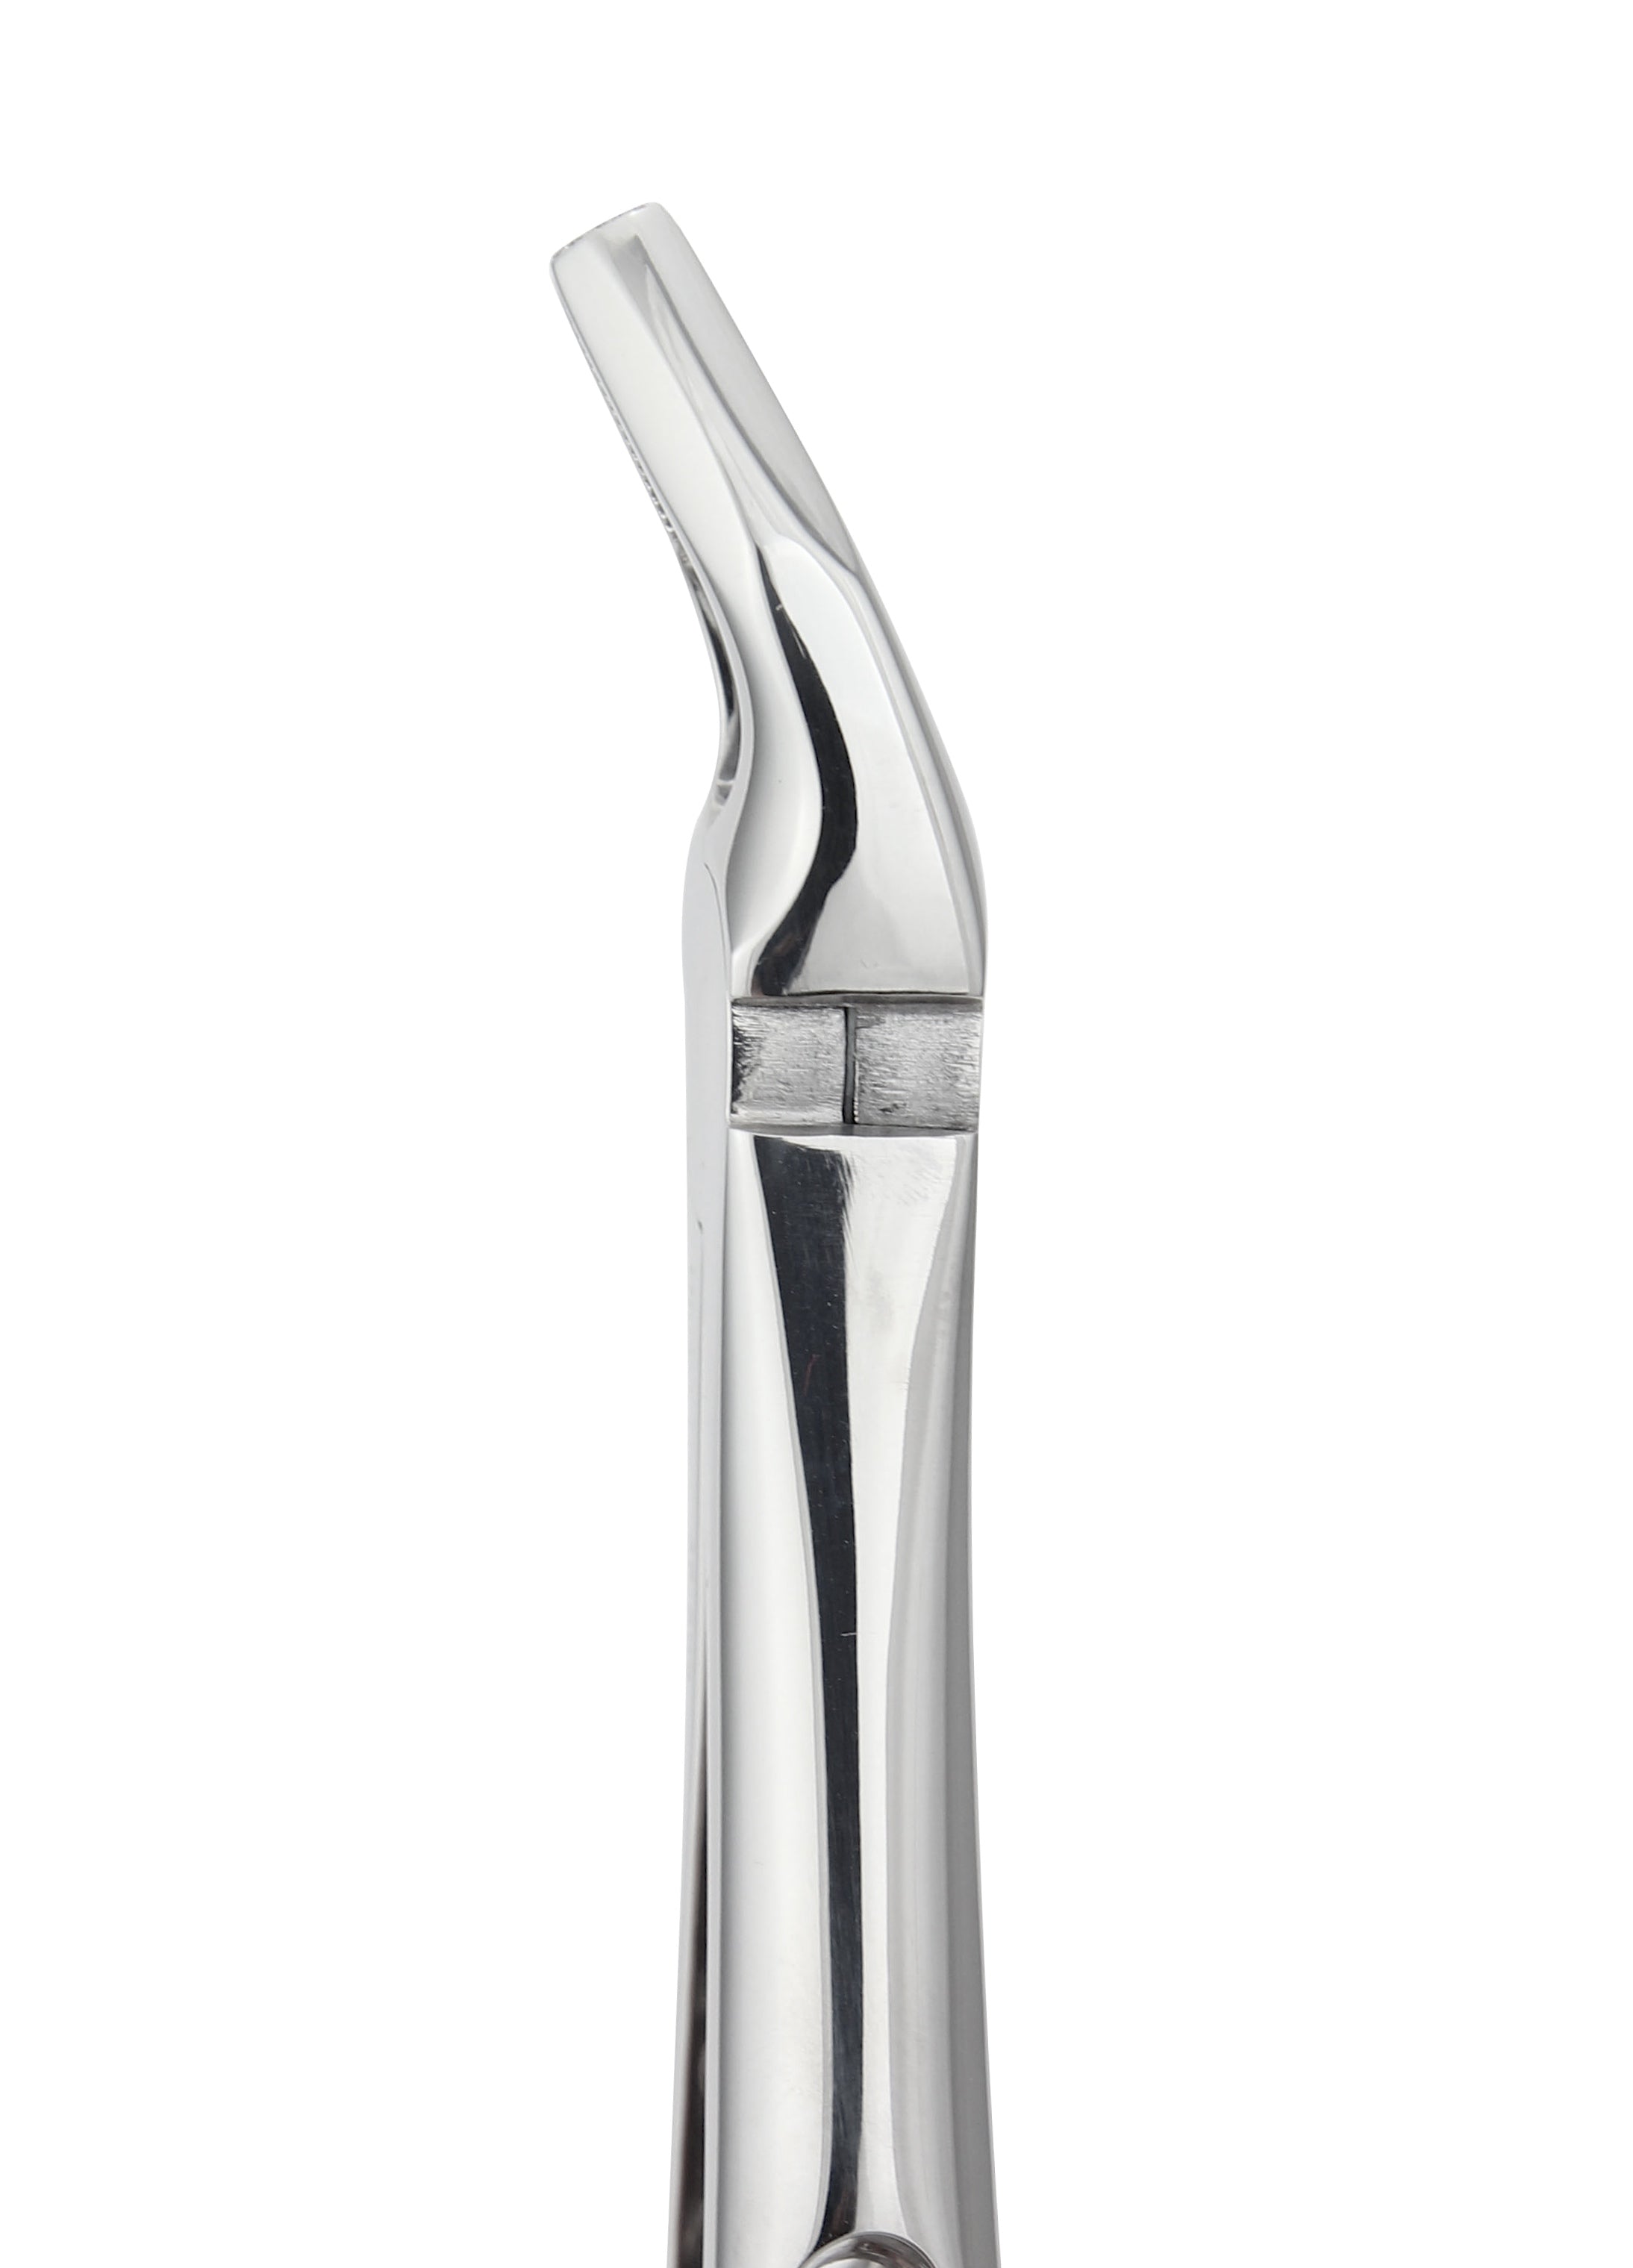 Universal Upper Extraction Forceps 508